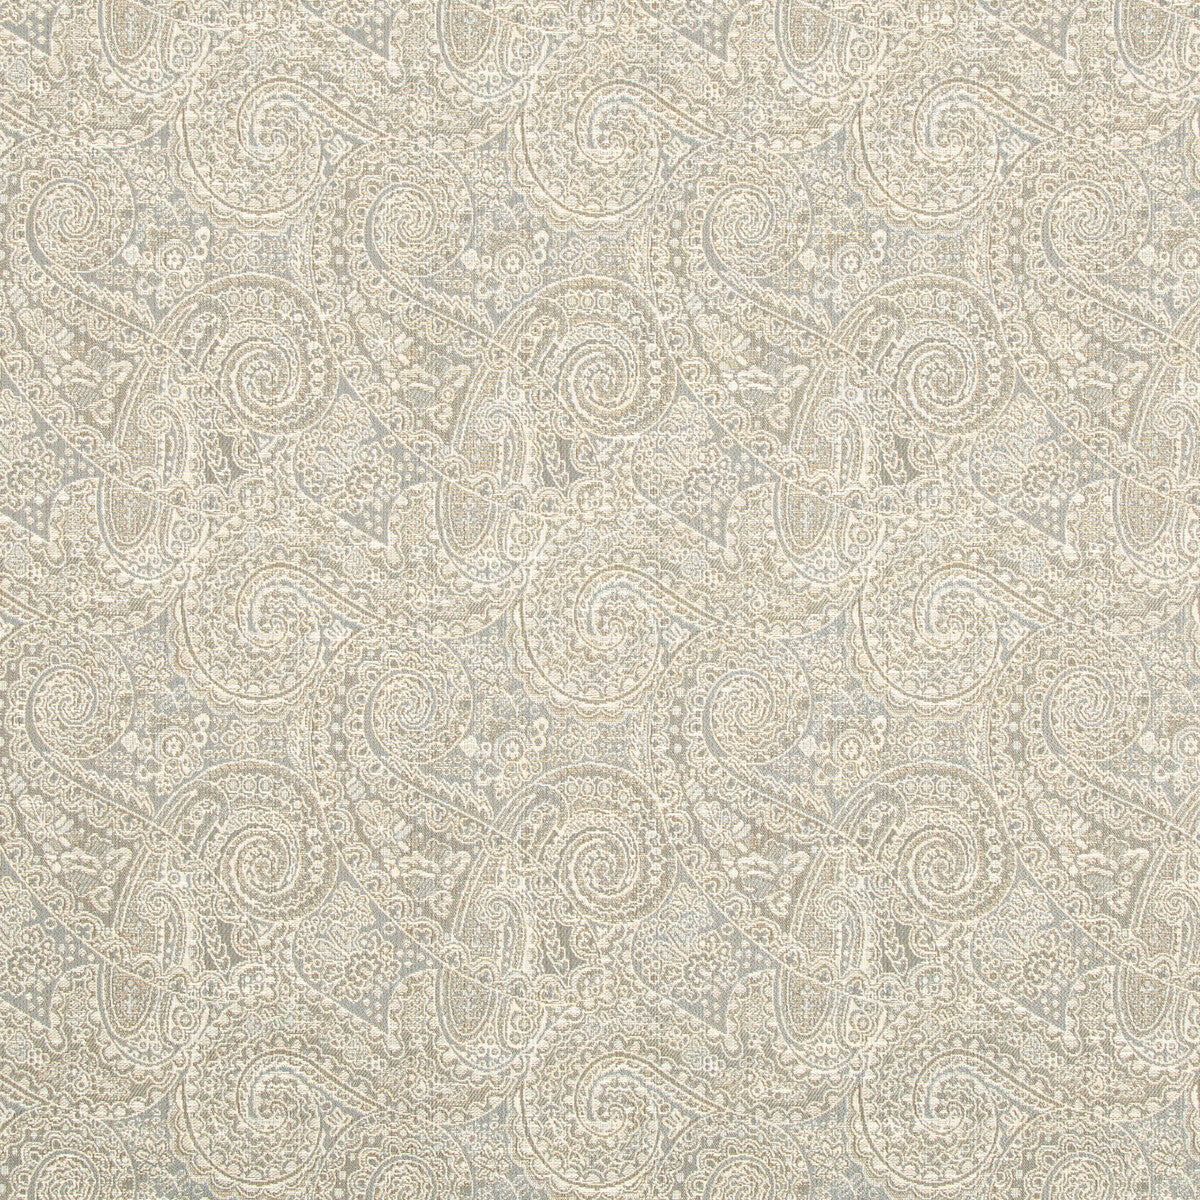 Kasan fabric in pewter color - pattern 31524.511.0 - by Kravet Contract in the Gis Crypton collection